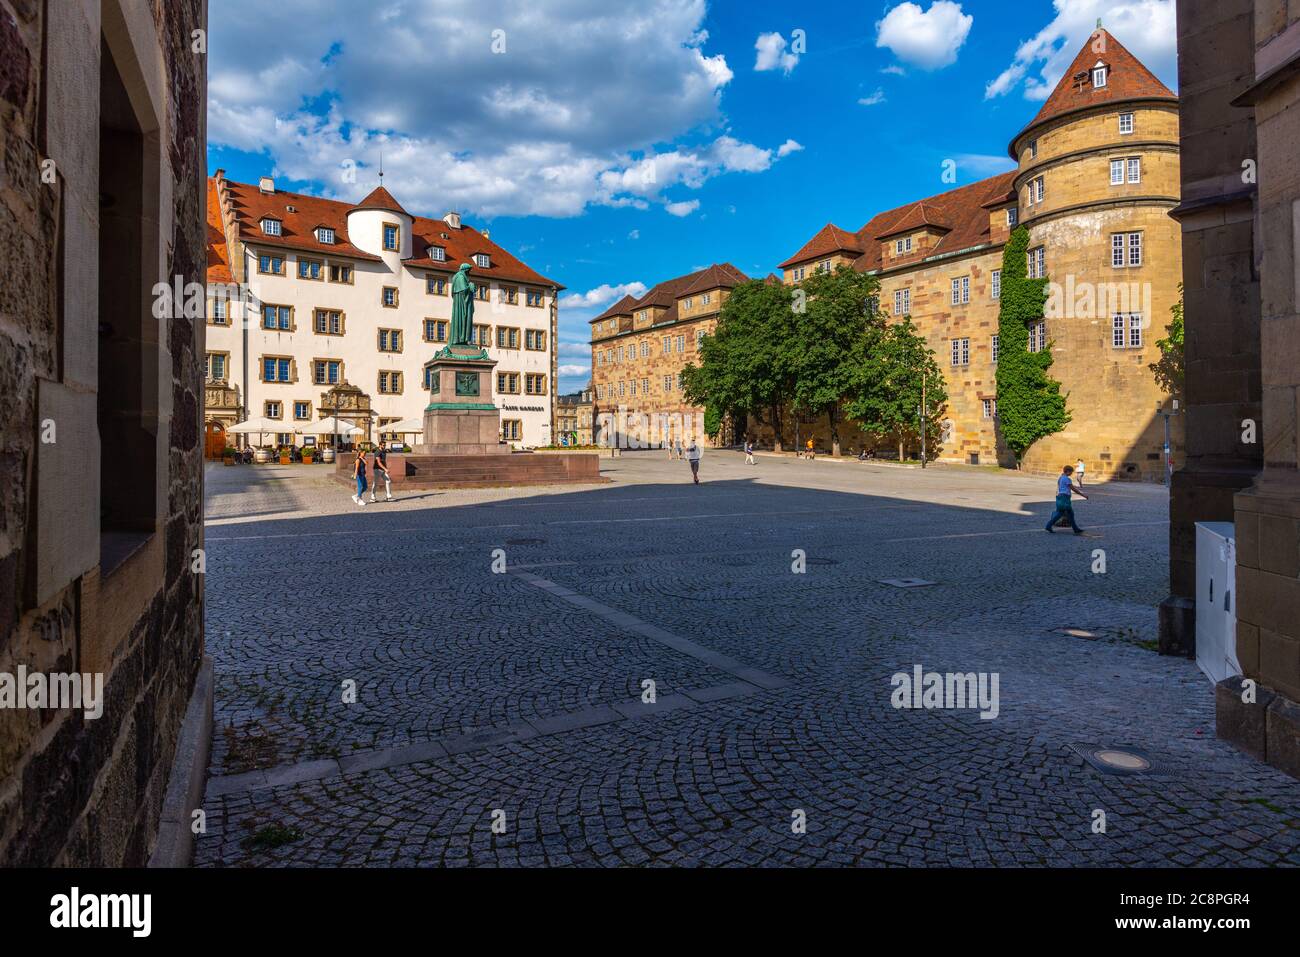 Landesmuseum (right) and Alte Kanzlei or Old Chancellery at Schillerplatz, city centre, Stuttgart, Baden-Württemberg, South Germany, Central Europe Stock Photo